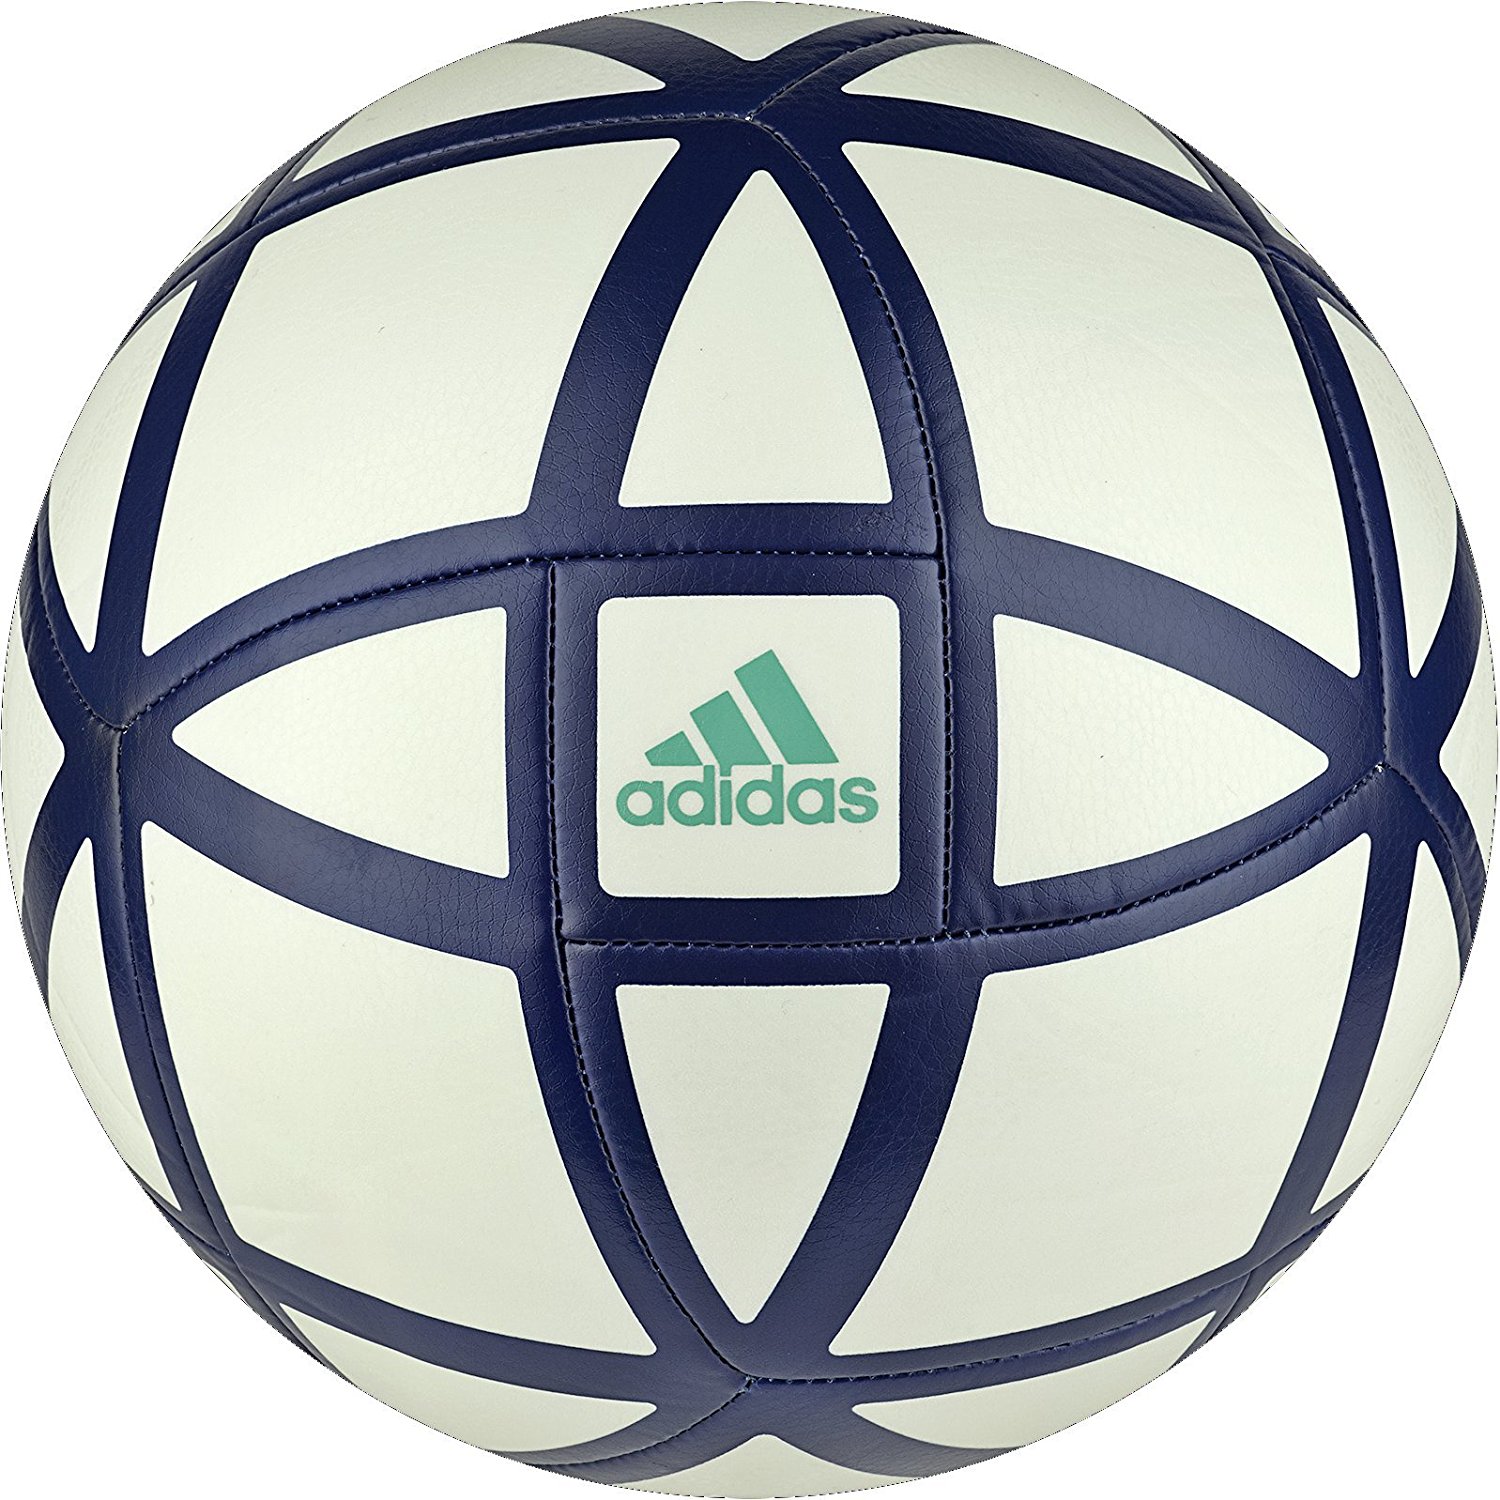 adidas Performance Glider Soccer Ball as low as $8.32! (was $20) - Become a Coupon Queen